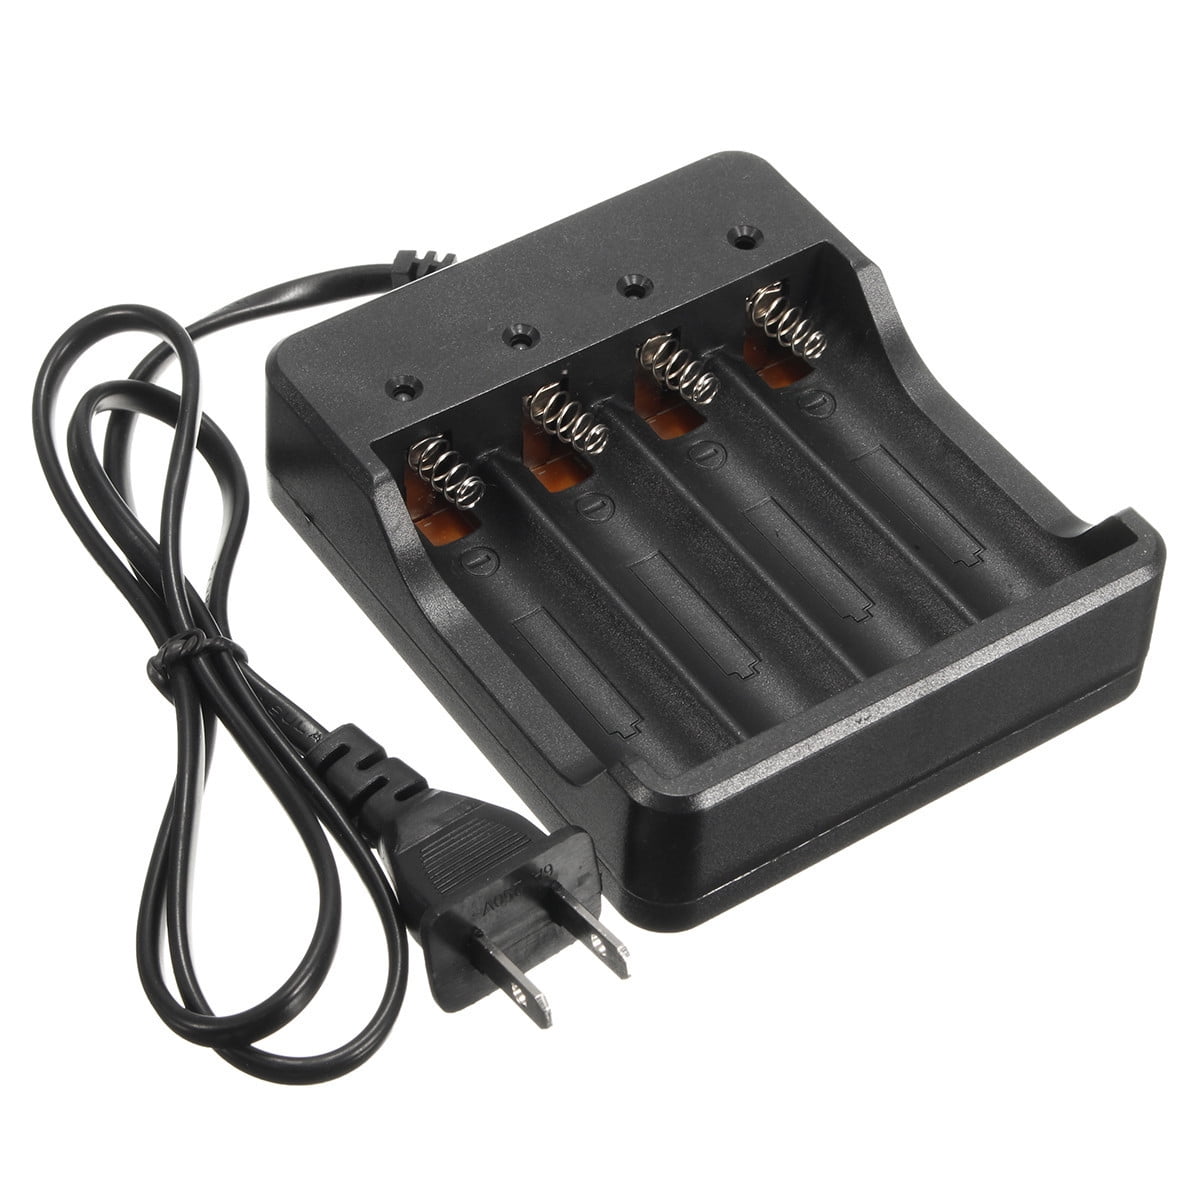 Eu Plug 4Slots Battery Charger With Protection 18650 Lithium-Ion Battery HI 